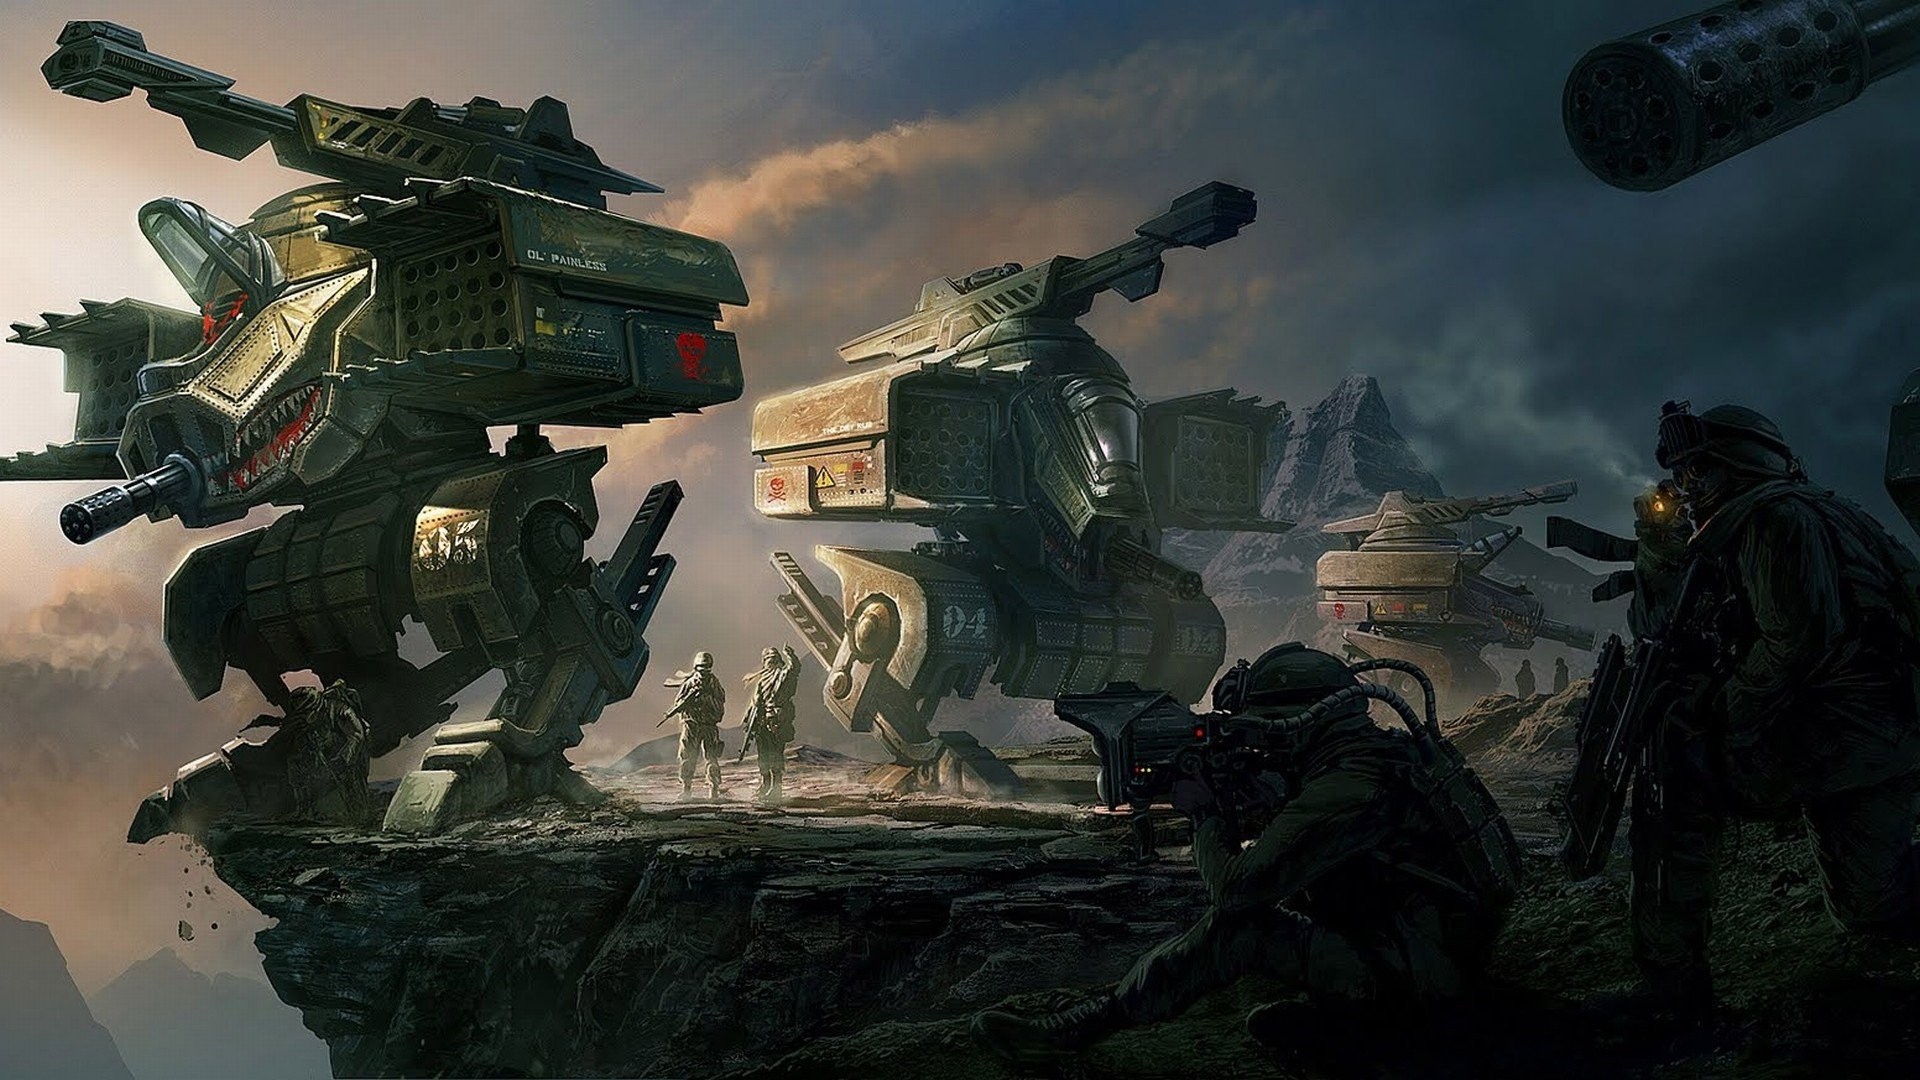 mech wallpaper,action adventure game,pc game,strategy video game,mecha,shooter game